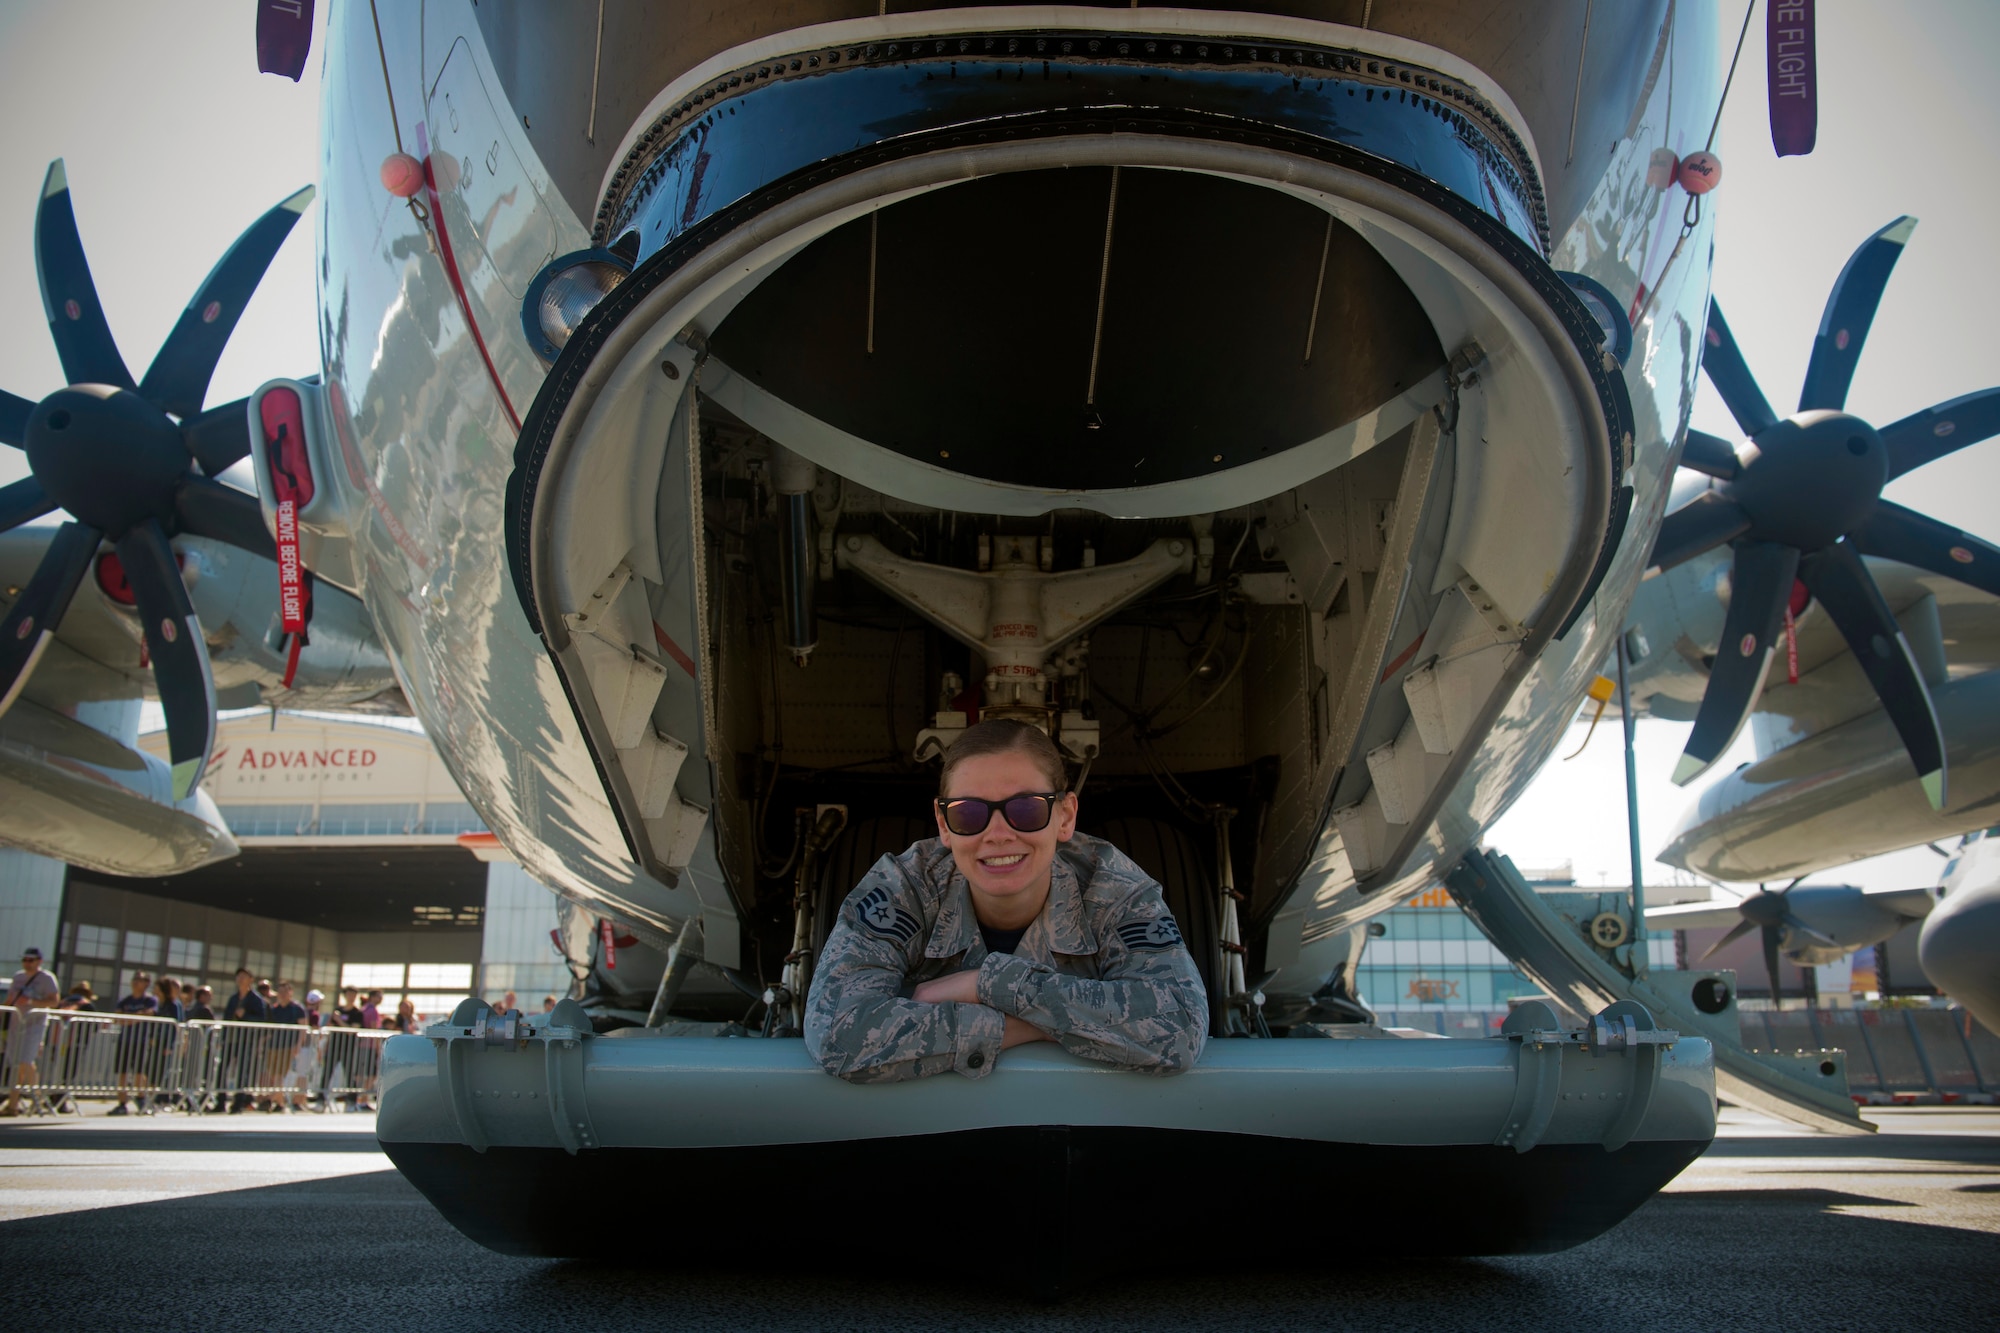 U.S. Air National Guard Staff Sgt. Jennatte Berger, an avionics technician from the 109th Airlift Wing at Stratton Air National Guard Base in Scotia, N.Y., poses for a photo on the skis of an LC-130 Hercules "Skibird" from her unit at the Paris Air Show, June 22, 2019. This year was the first time the 109th AW, or any New York Air National Guard contingent, had participated in the Paris Air Show. (U.S. Air Force photo by Master Sgt. Eric Burks)